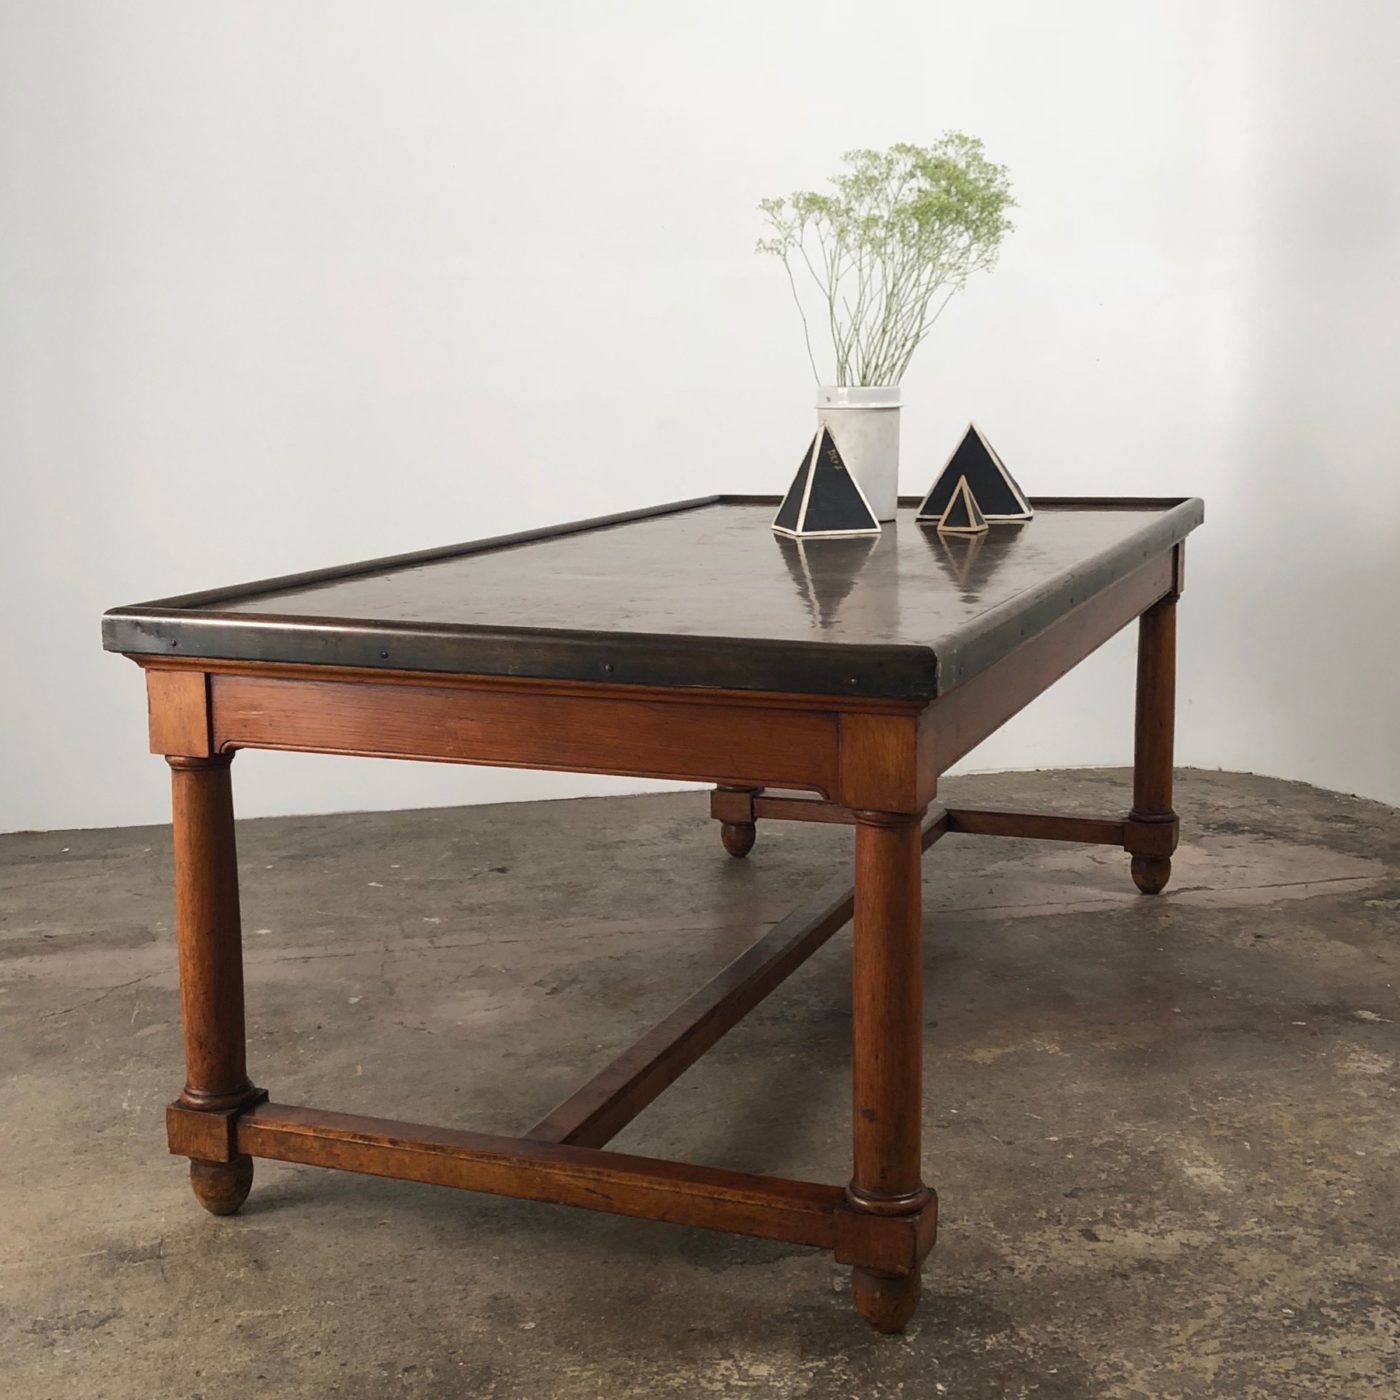 copper-bank-table0003